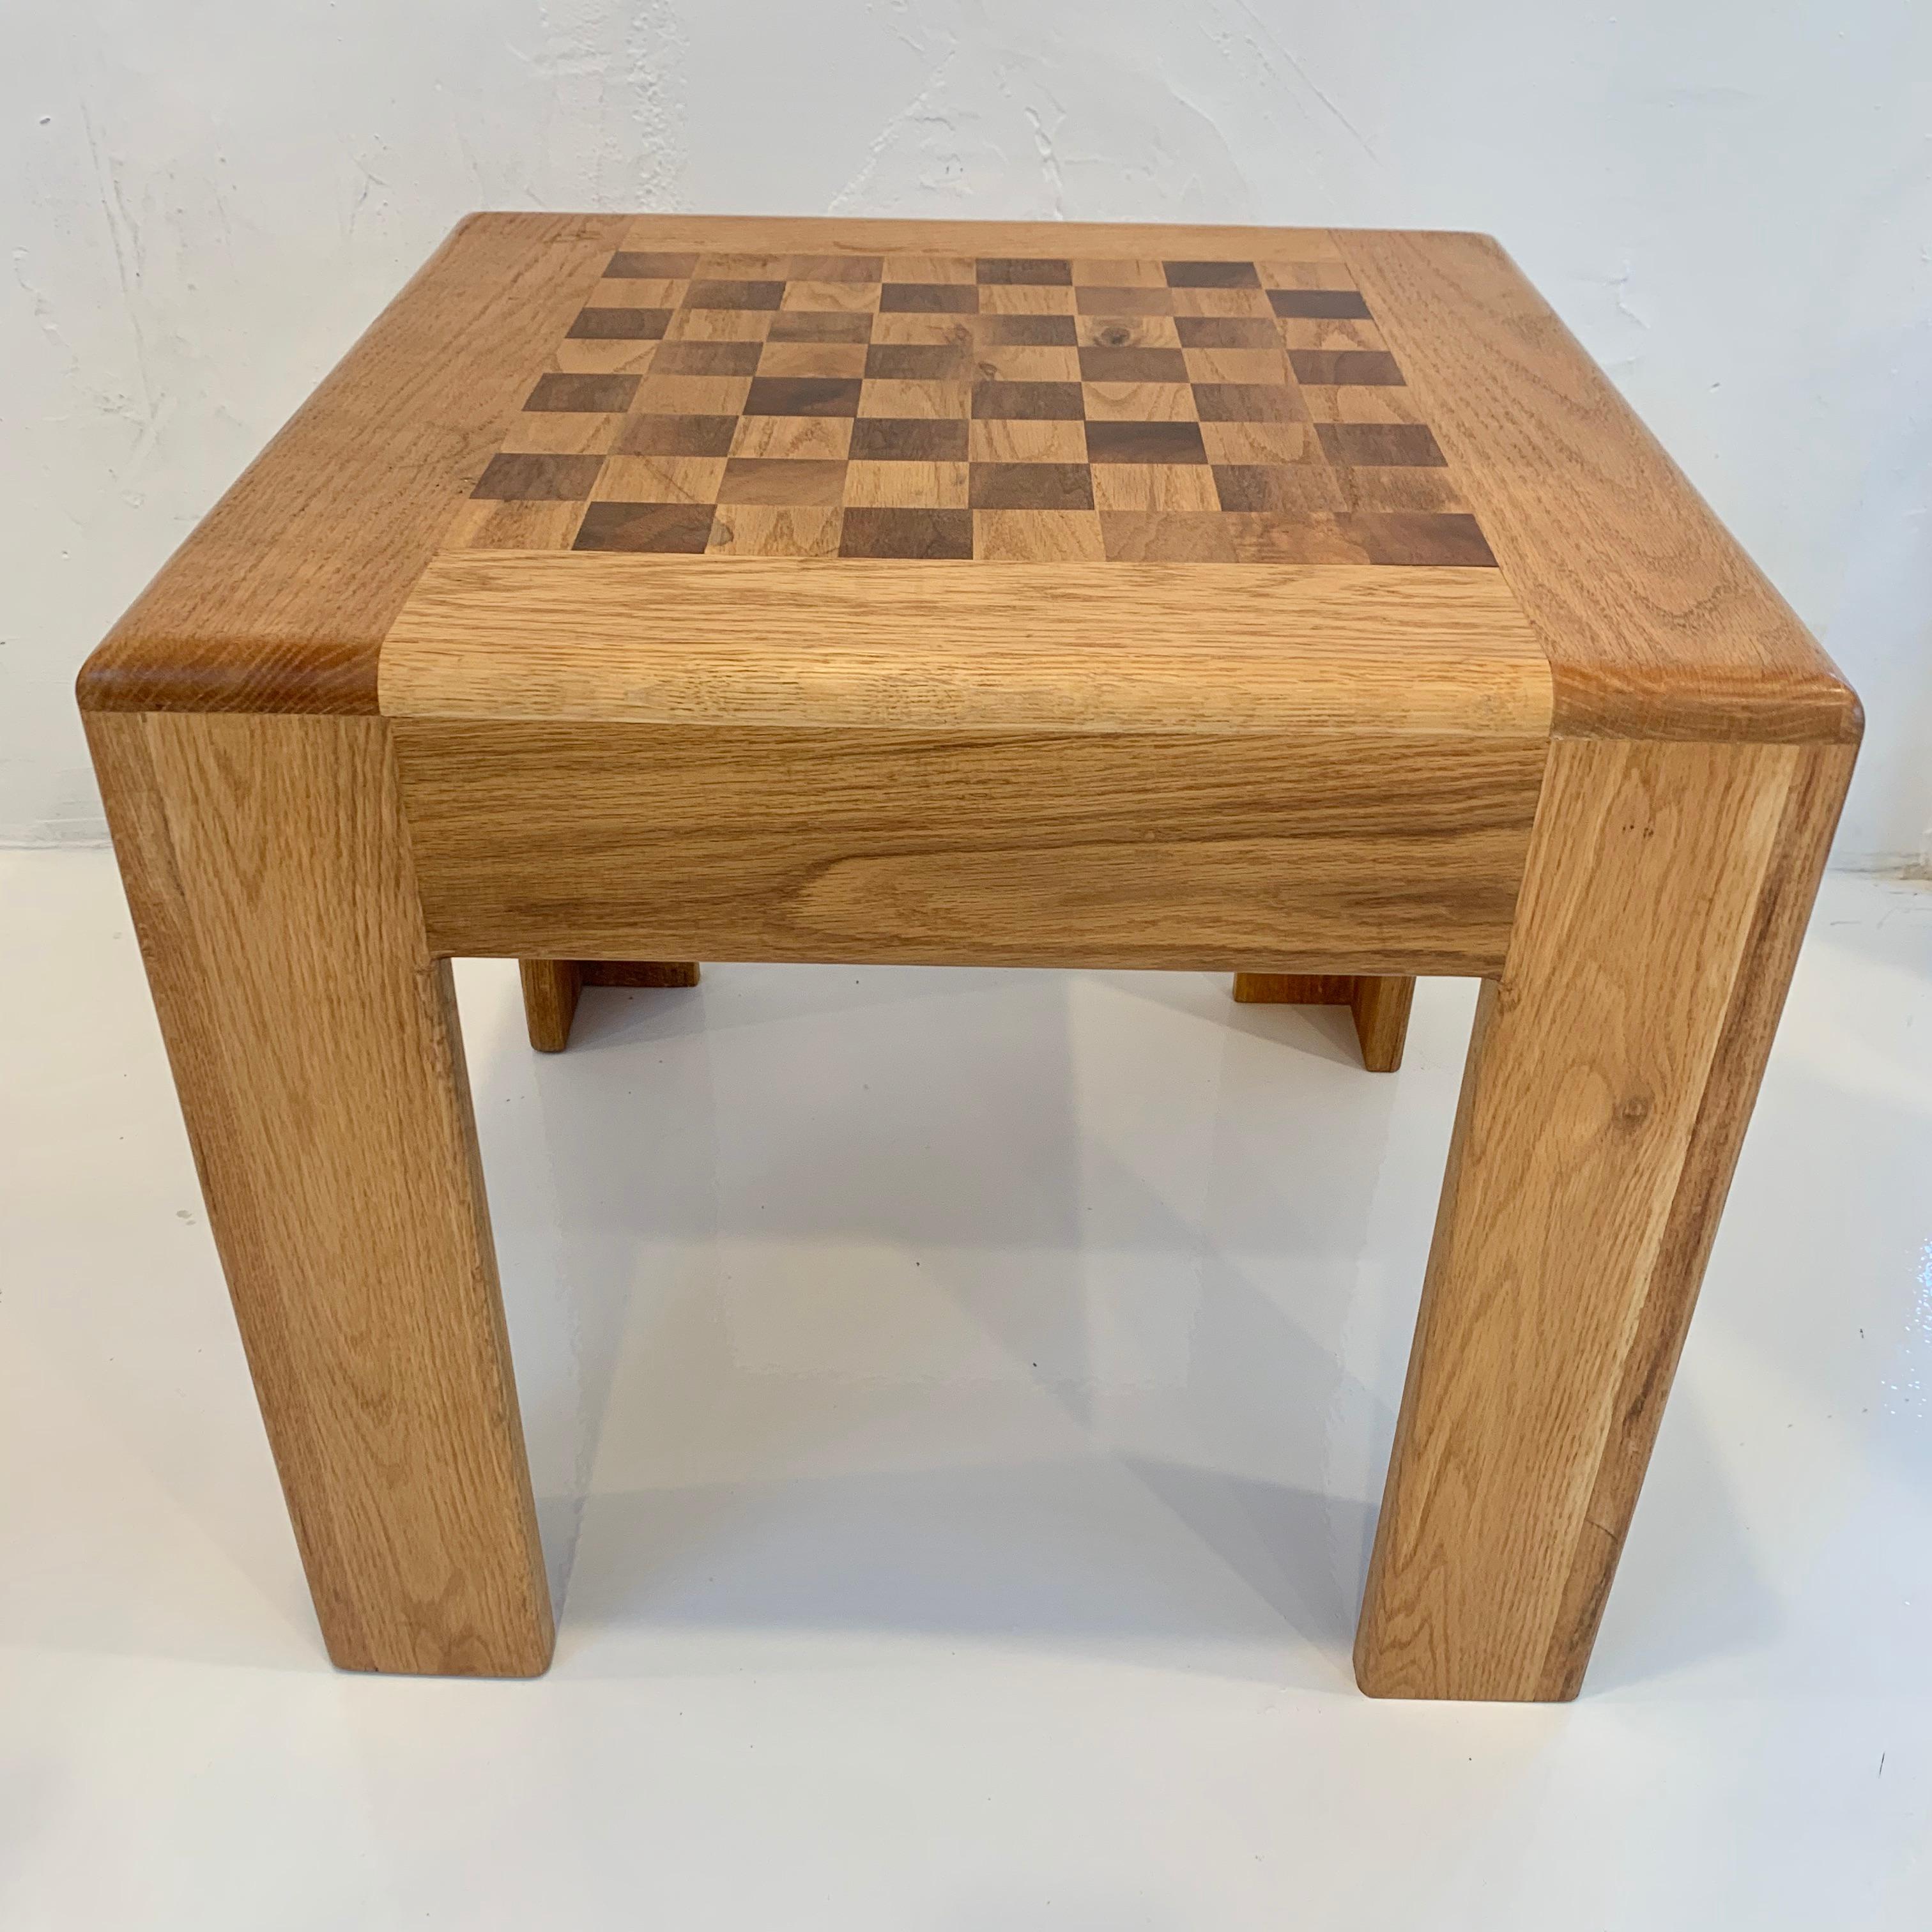 Handsome chess table made of oak. Great lines and perfect scale. 20.75